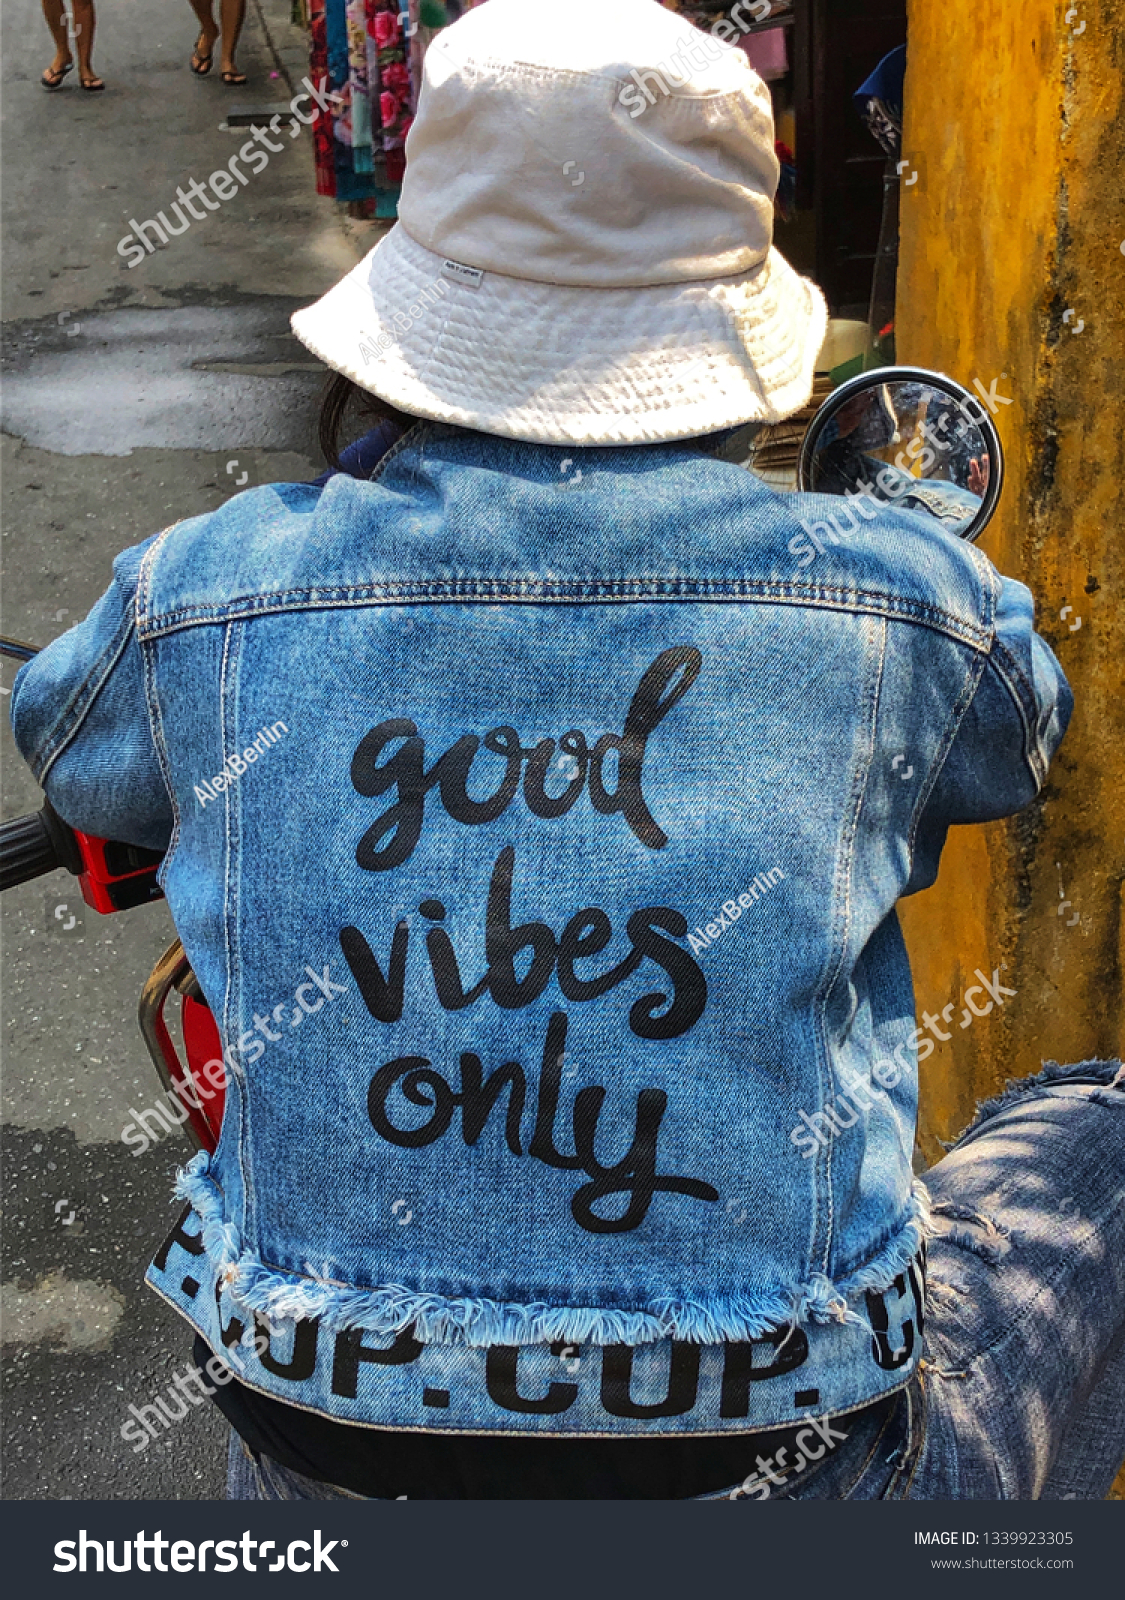 good vibes only jean jacket